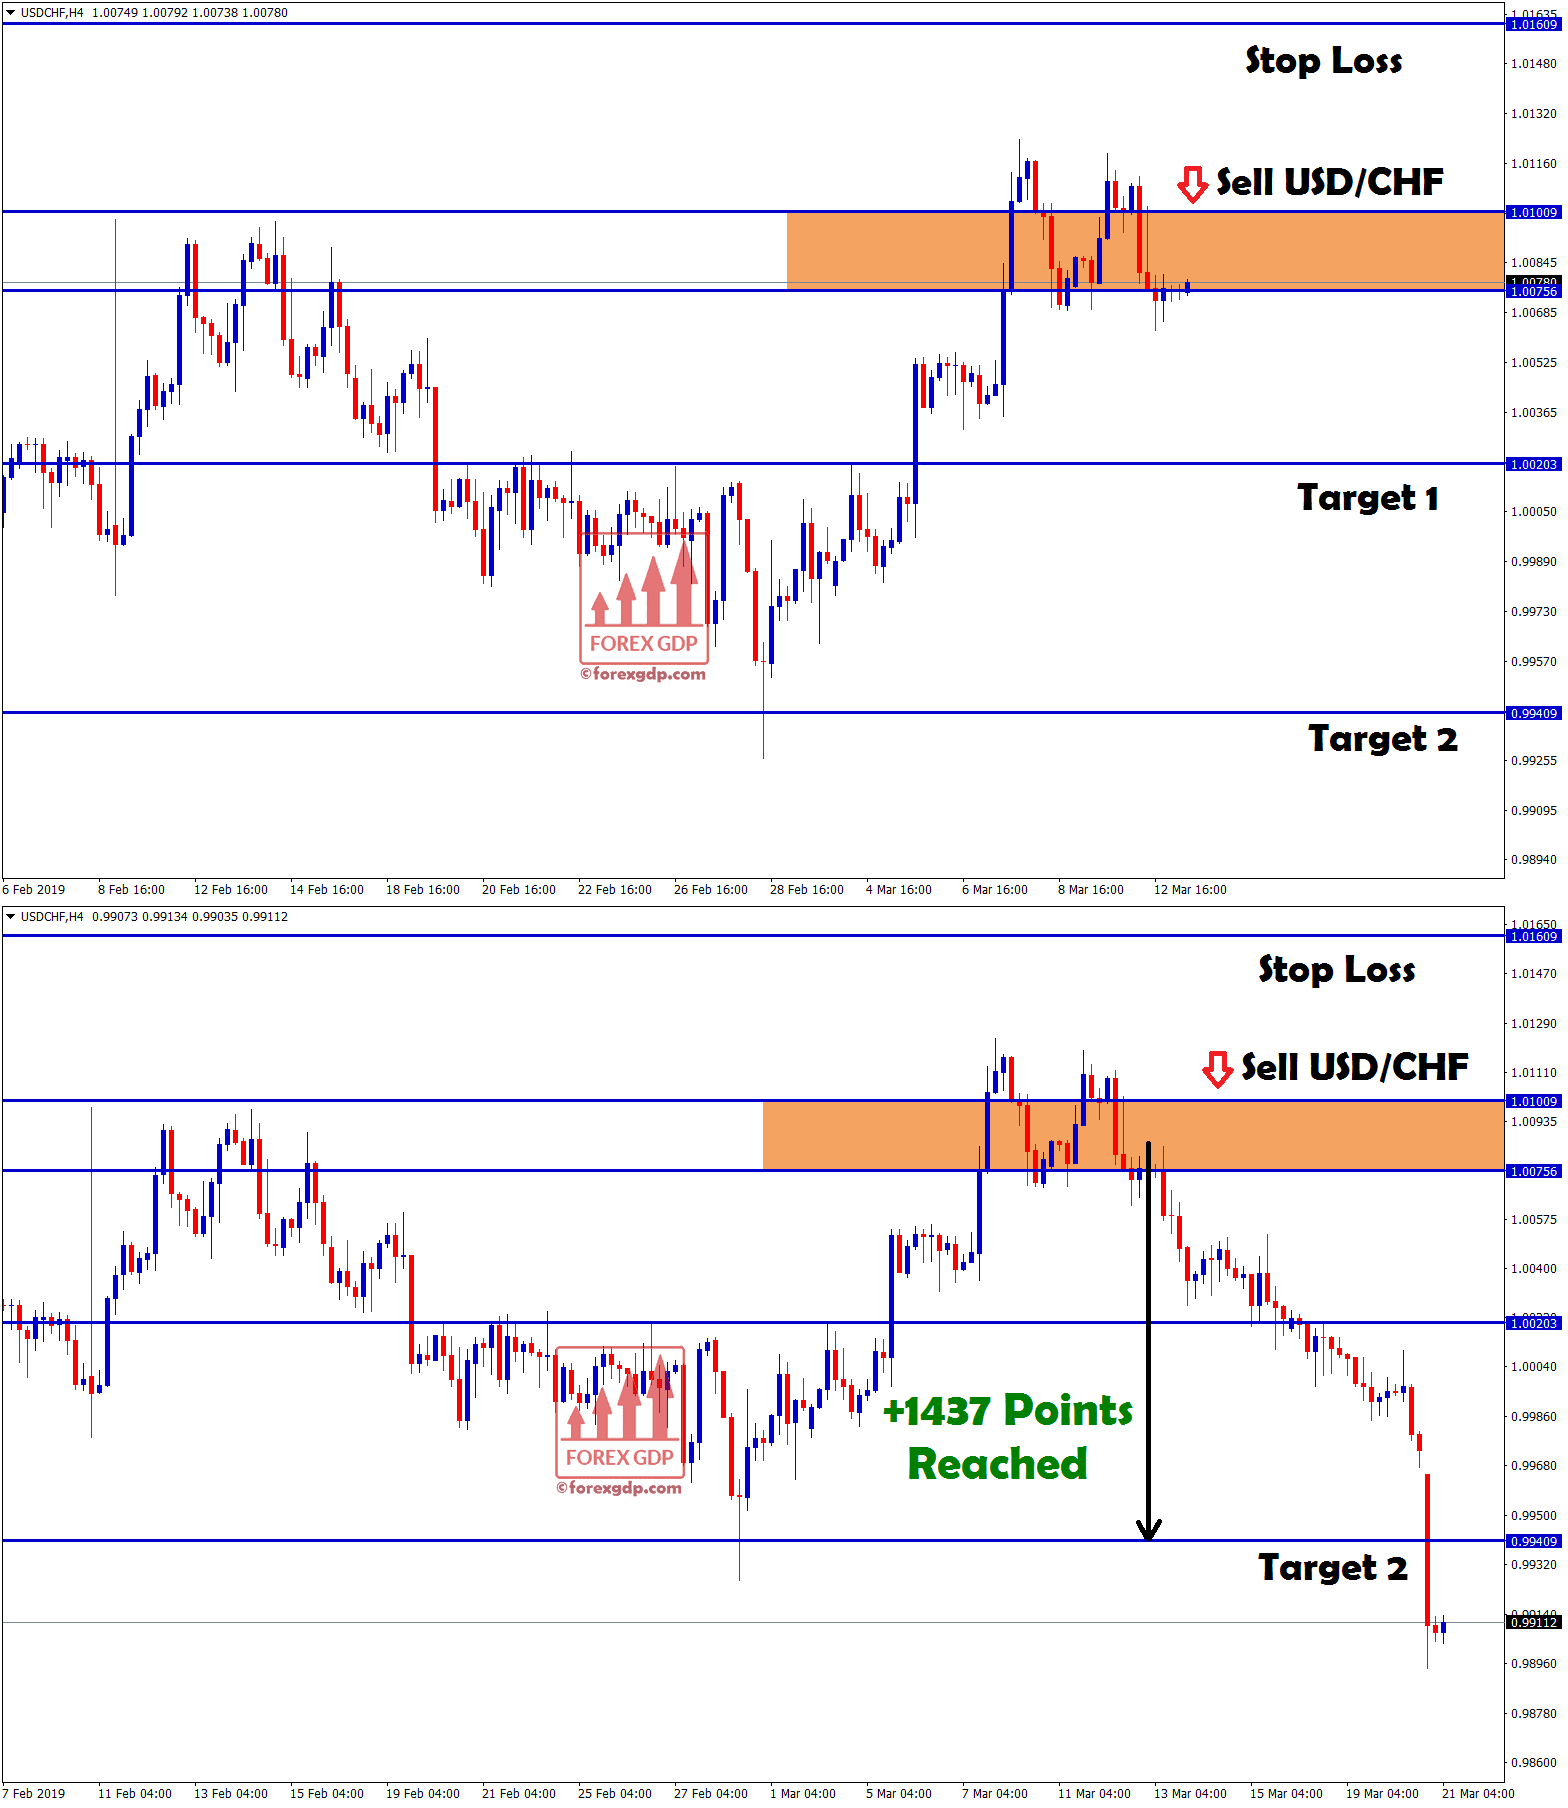 take profit 2 reached with +1437 points profit in usd/chf